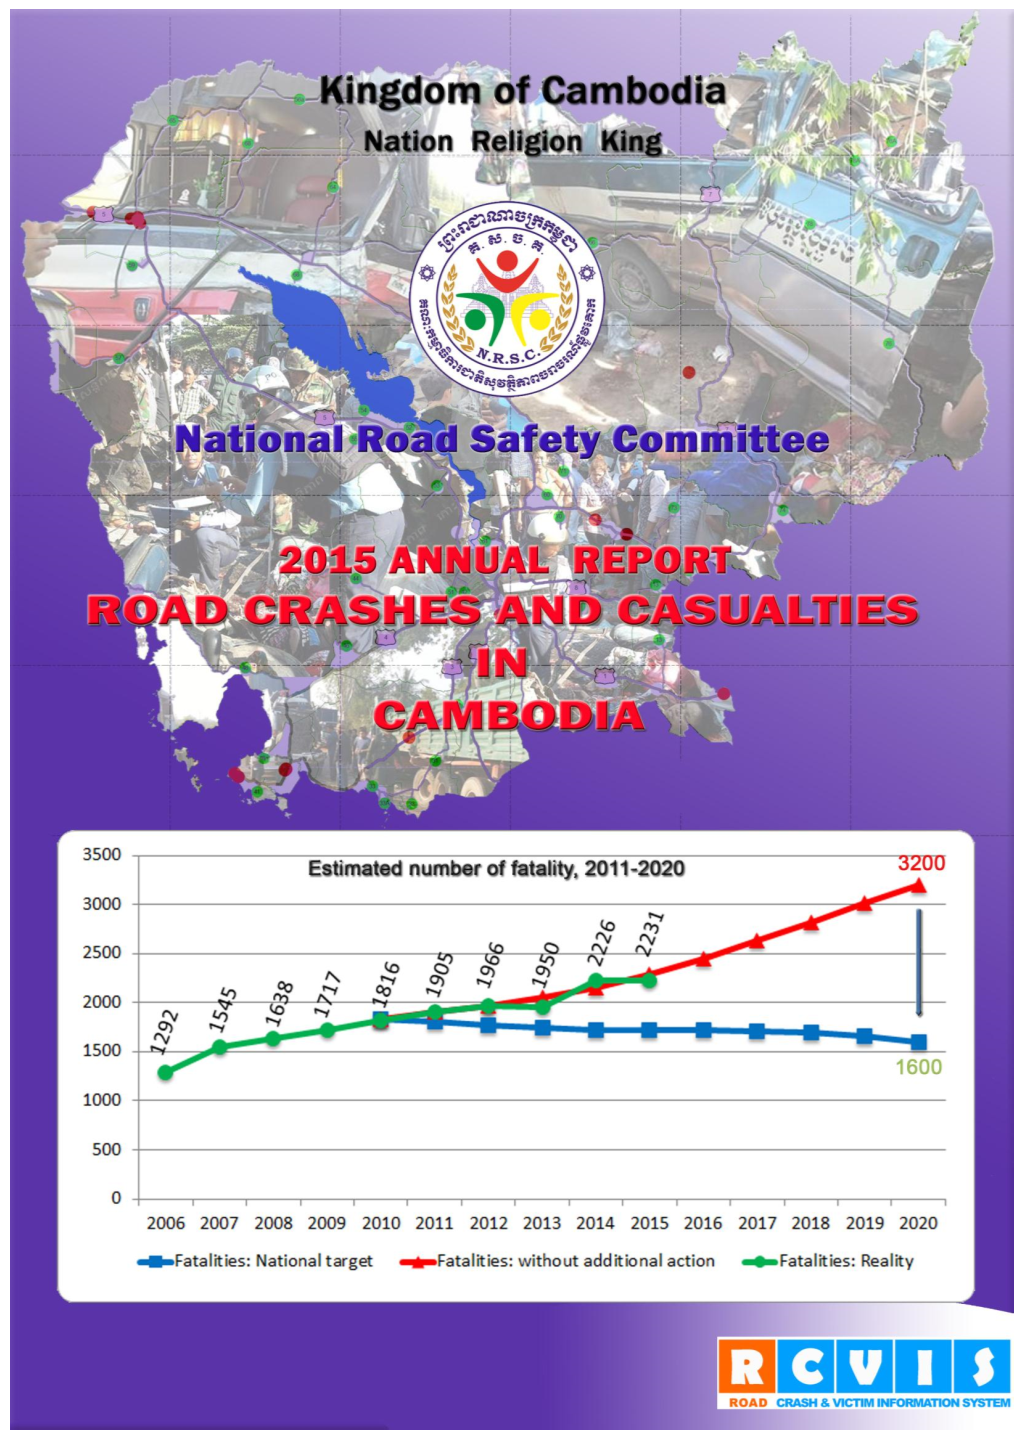 Cambodia Road Crash and Victim Information System Annual Report 2015 I